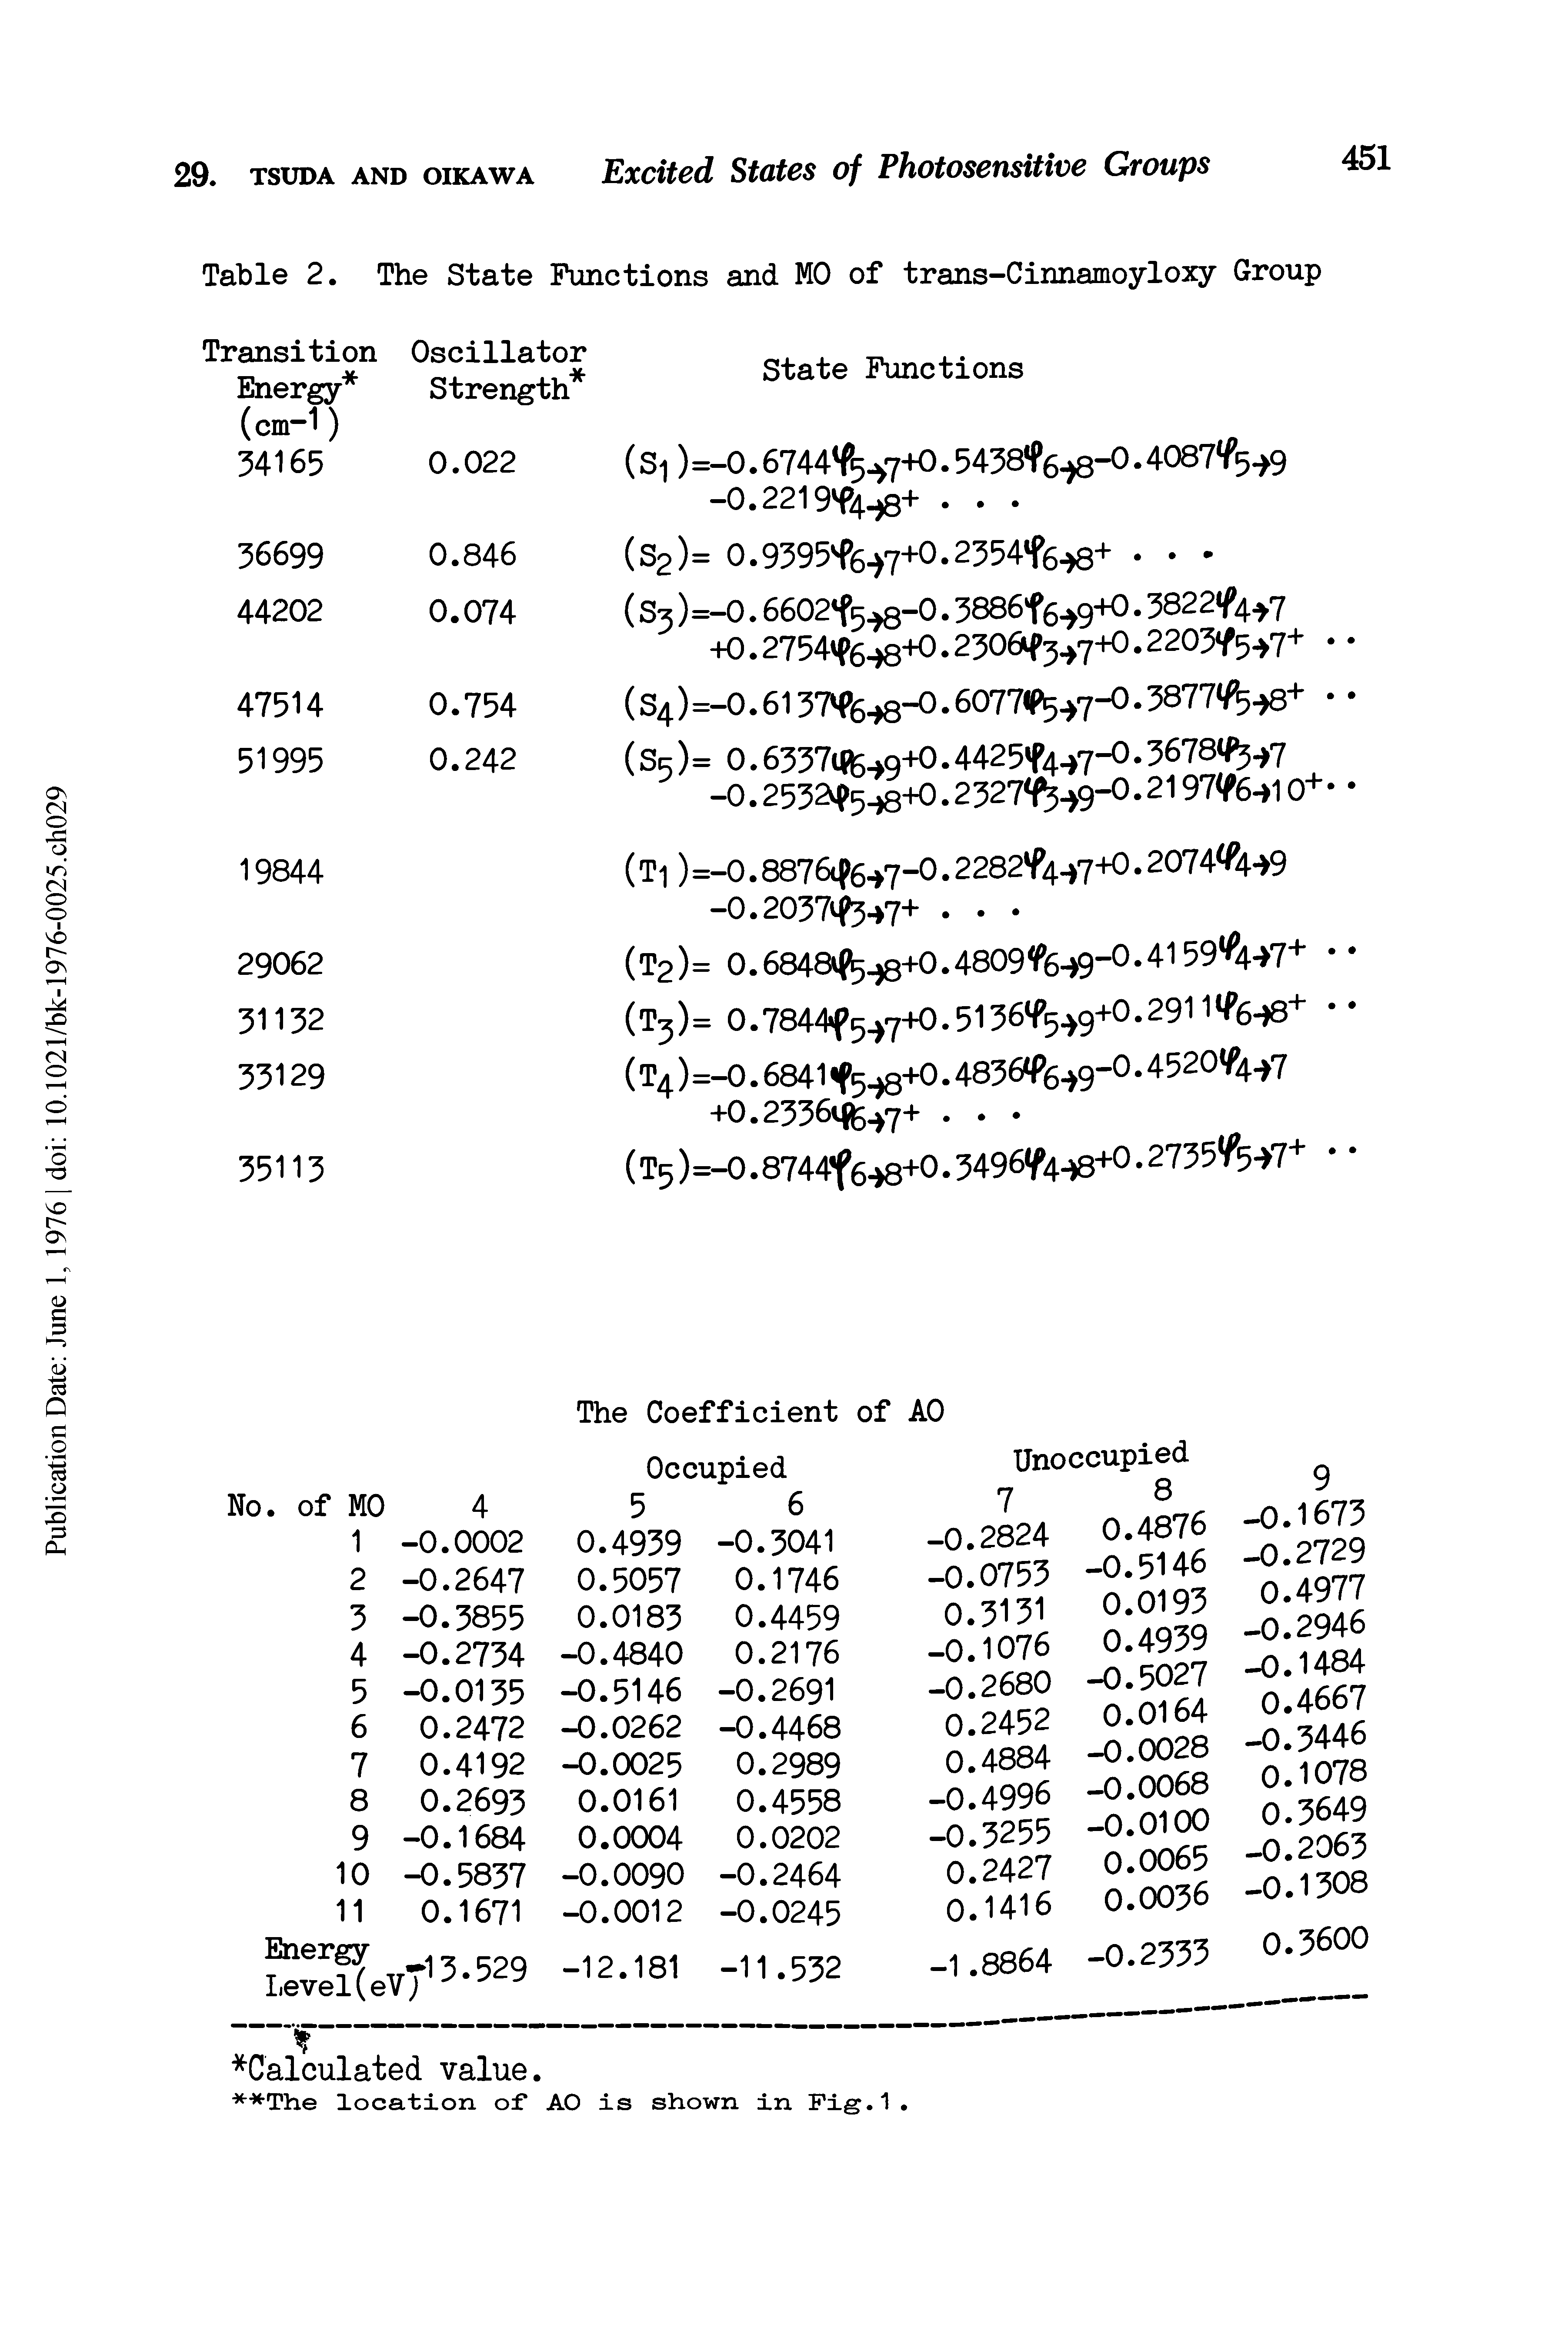 Table 2. The State Functions and MO of trans-Cinnamoyloxy Group...